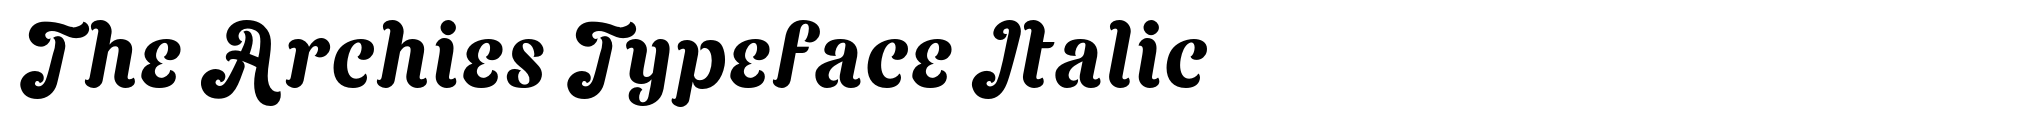 The Archies Typeface Italic image